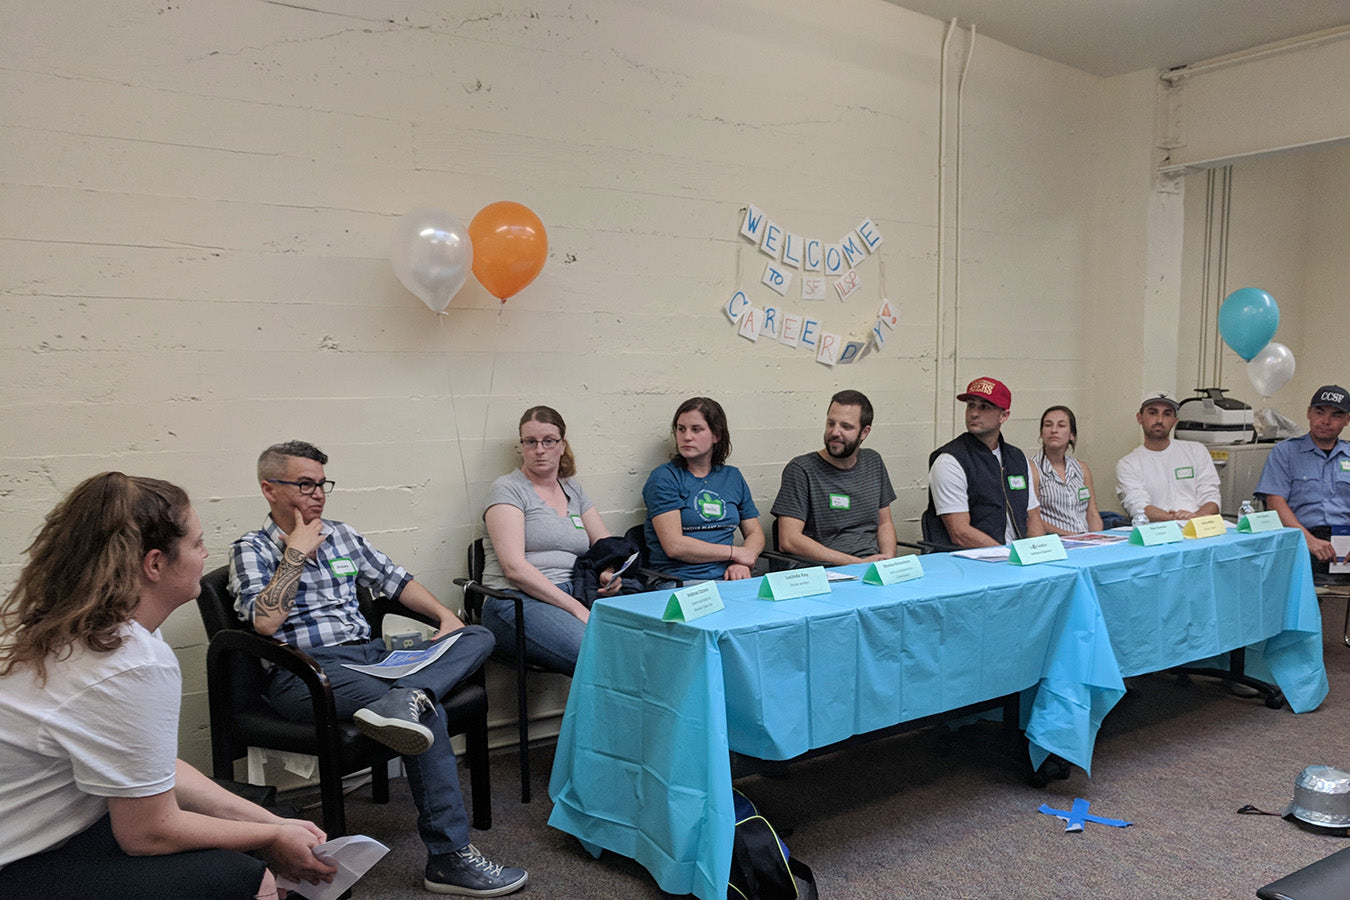 SF Independent Living Skill’s Career Day Panel